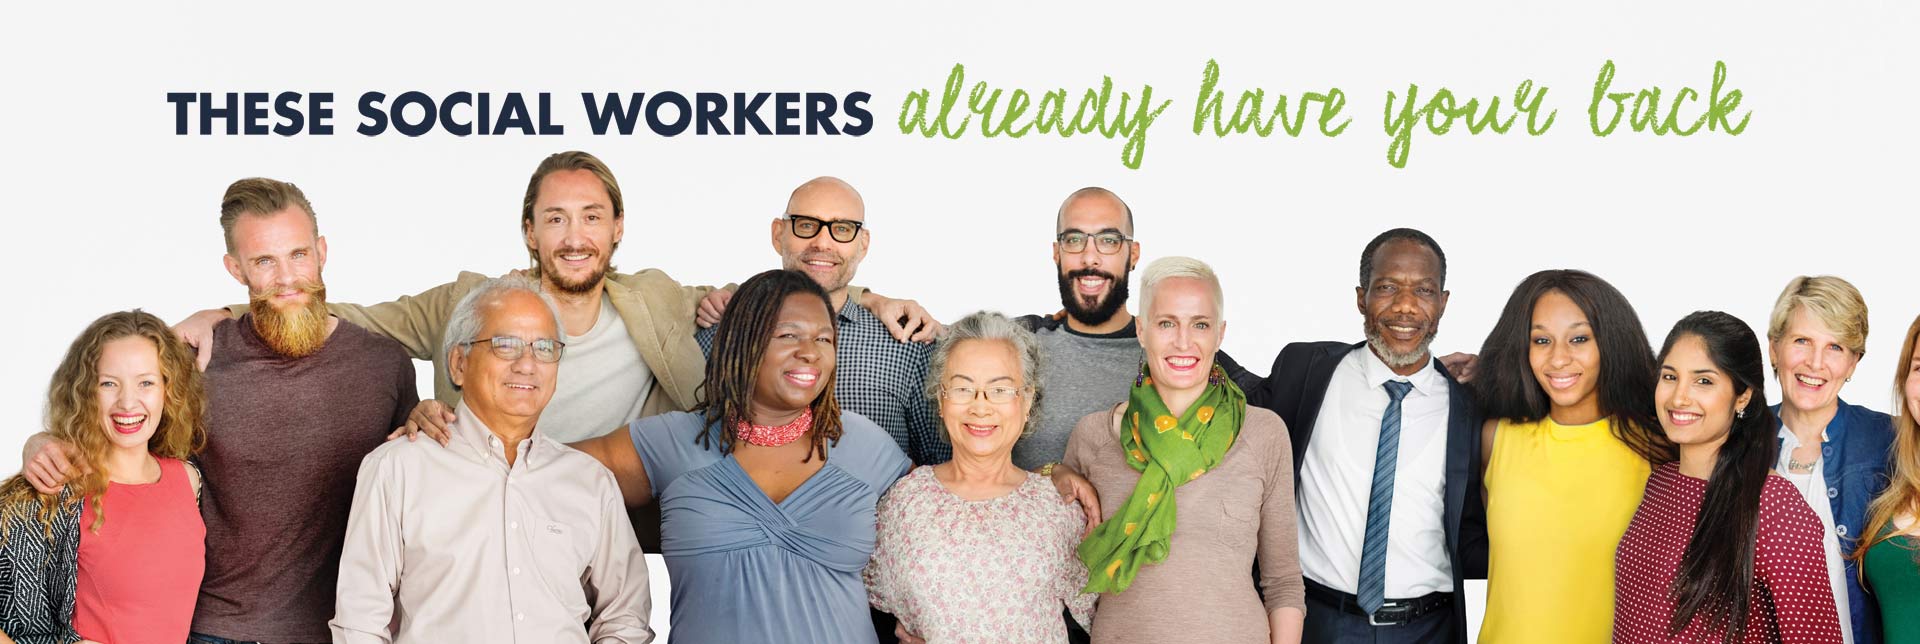 These social workers already have your back - group of smiling people